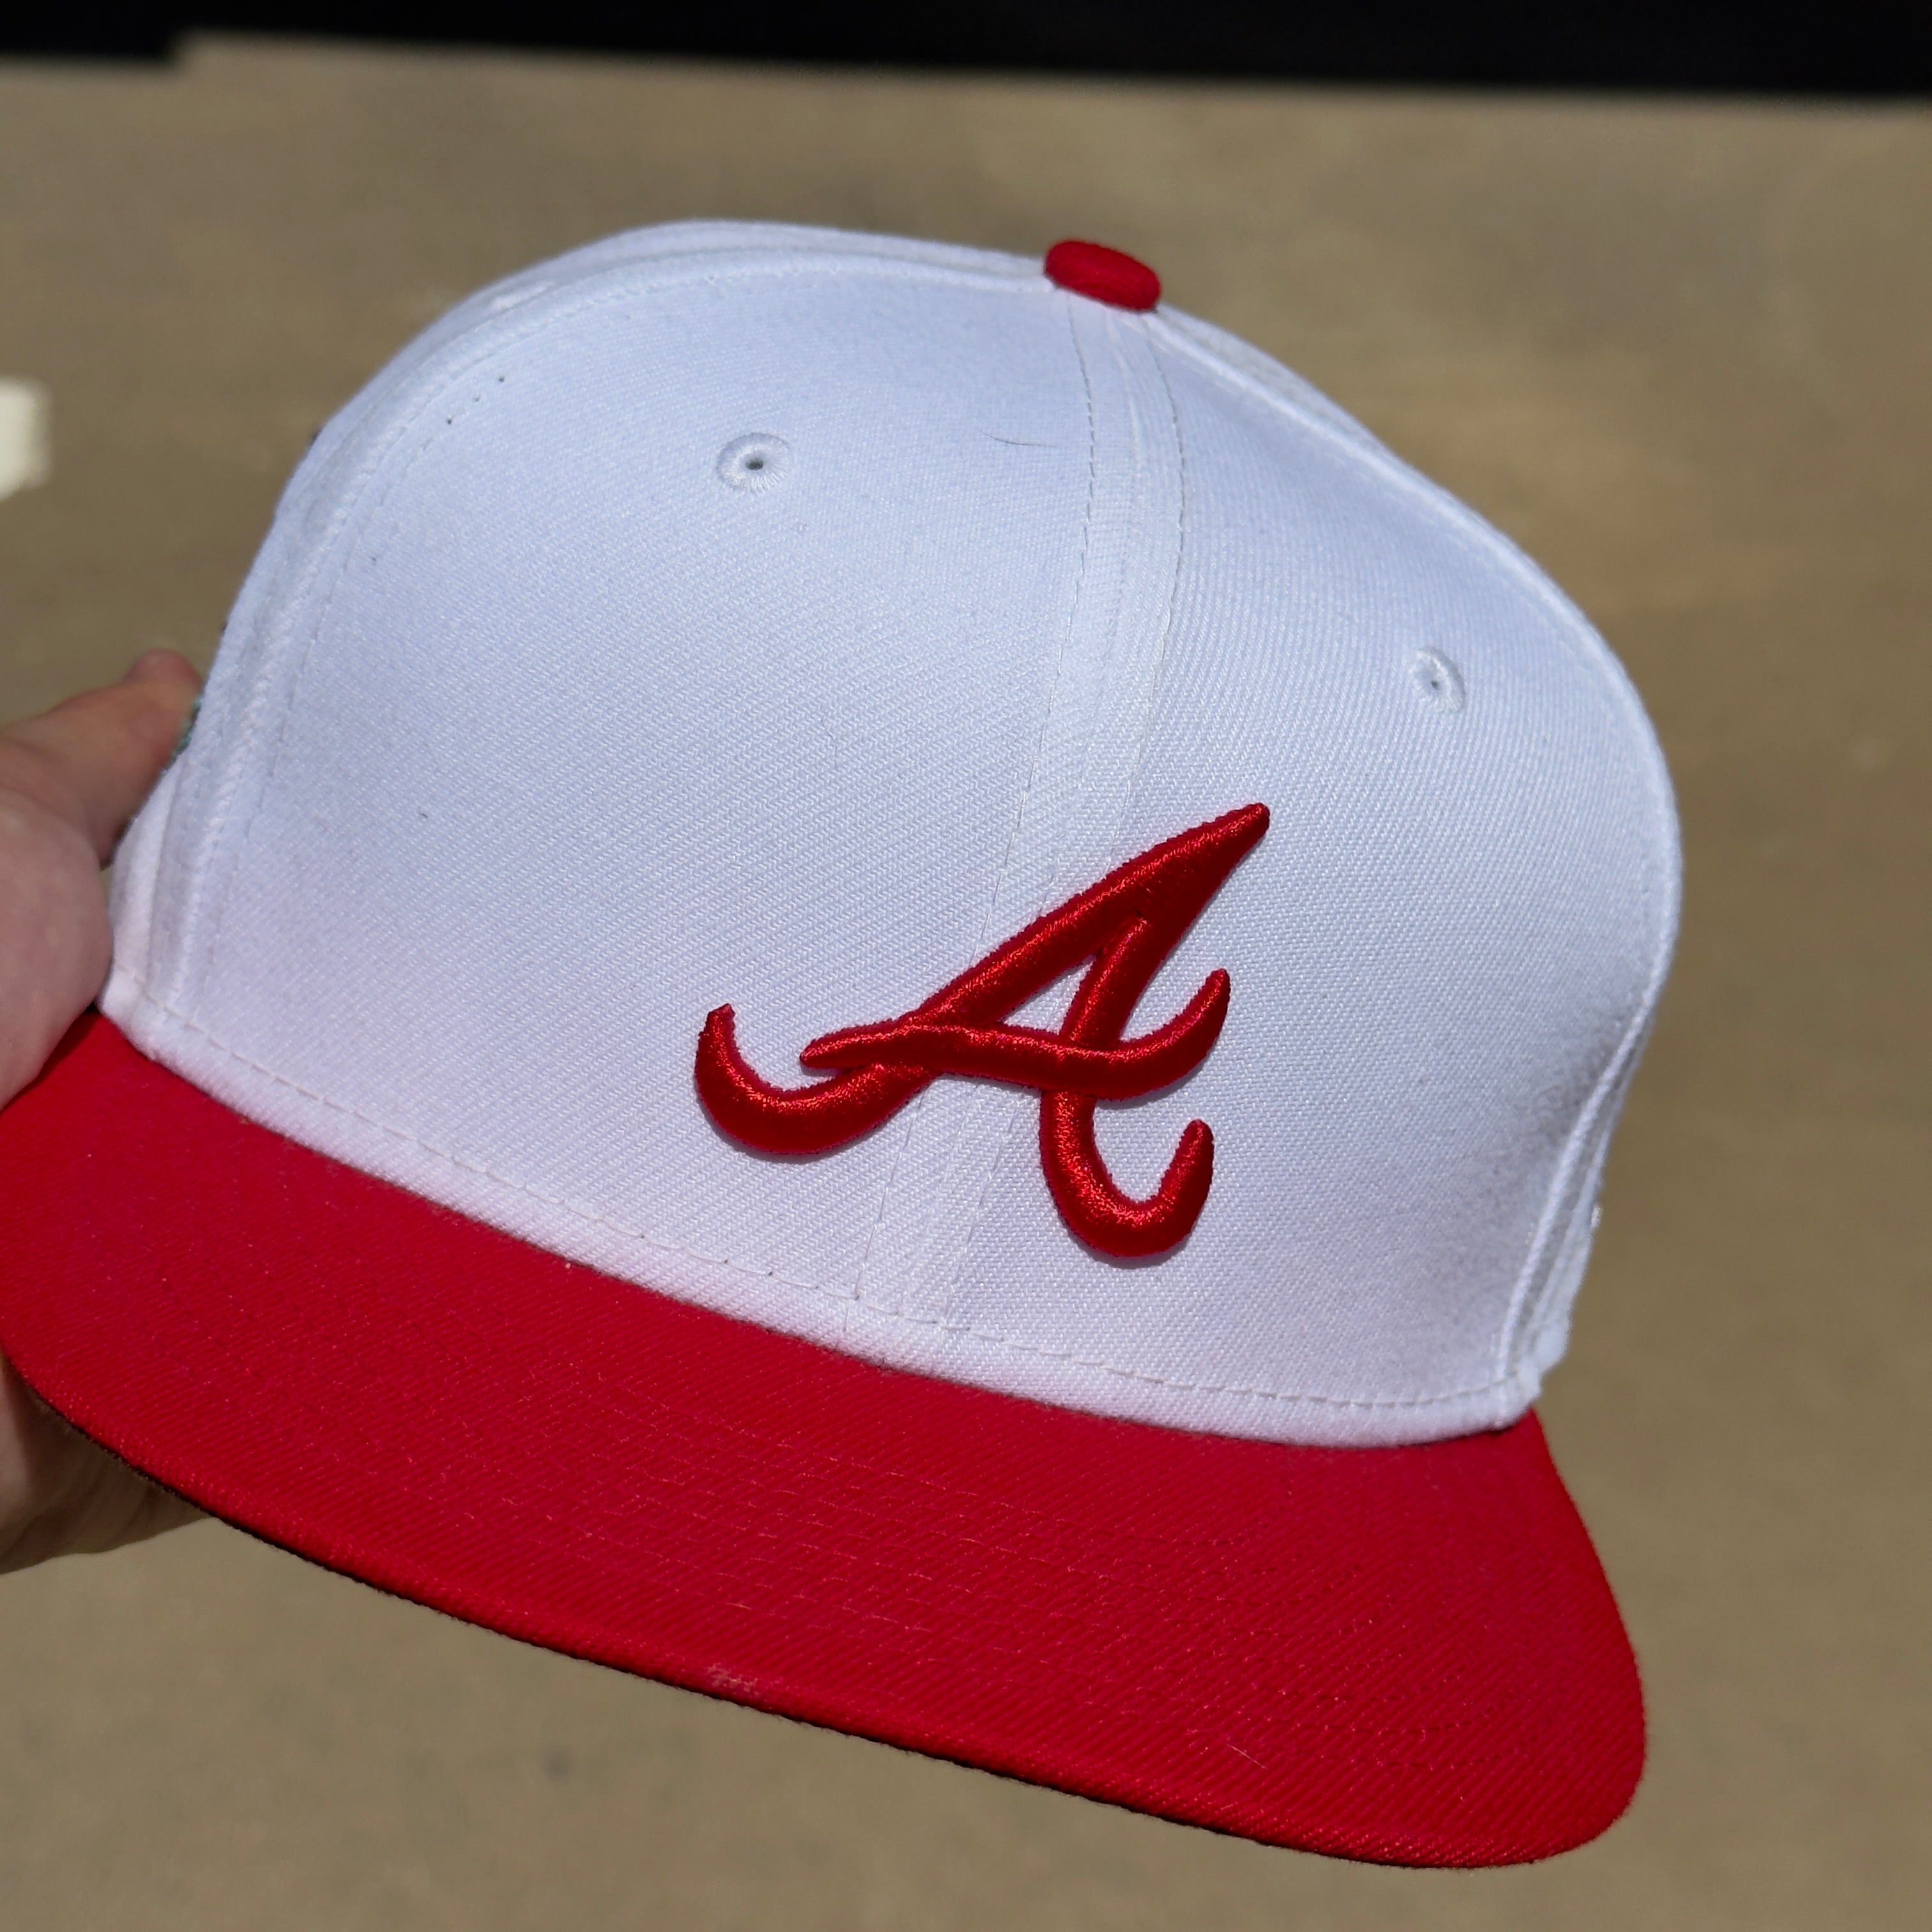 USED 3/8 White Atlanta Braves 1992 World Series 59FIFTY New Era Fitted Hat Cap